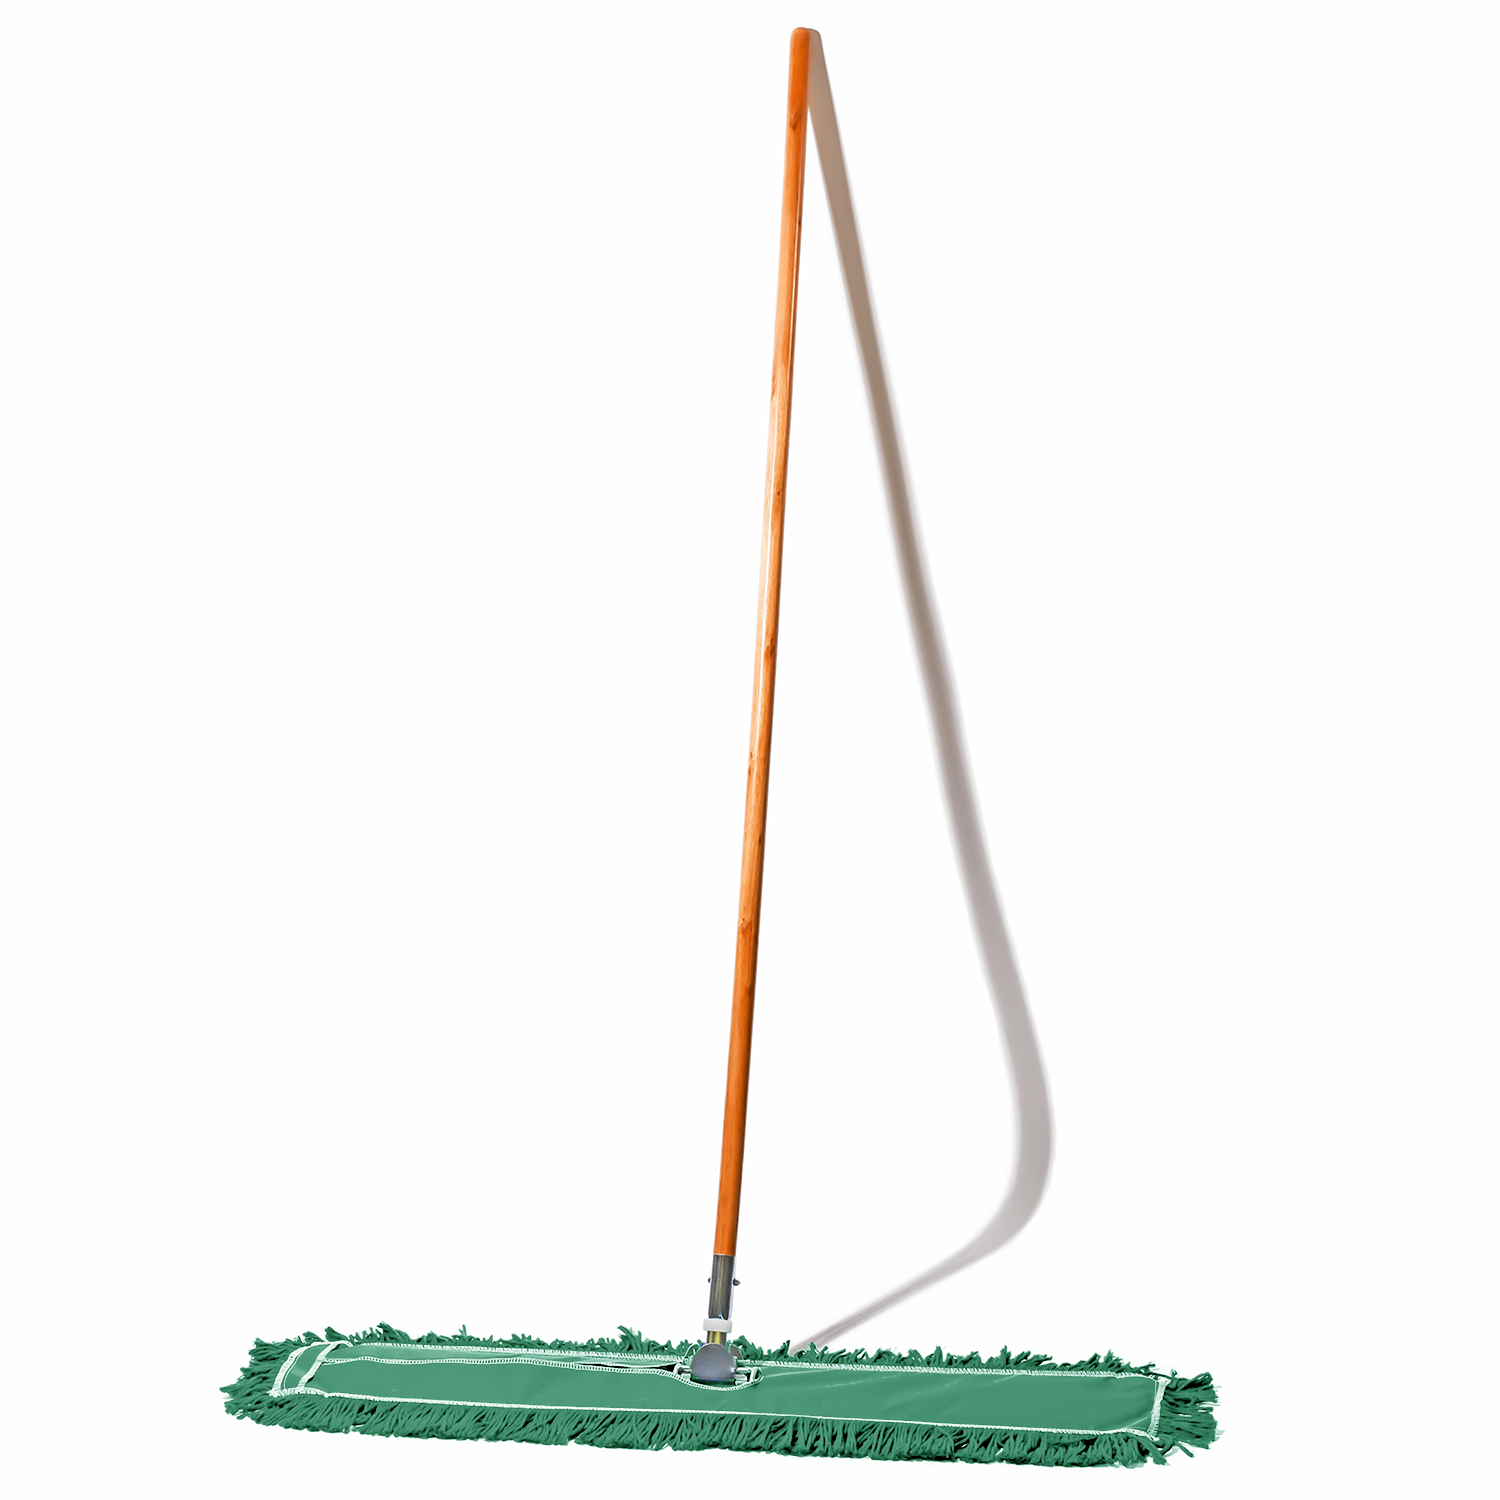 Tidy Tools 36 inch Dust Mop Kit Wood Handle, Green